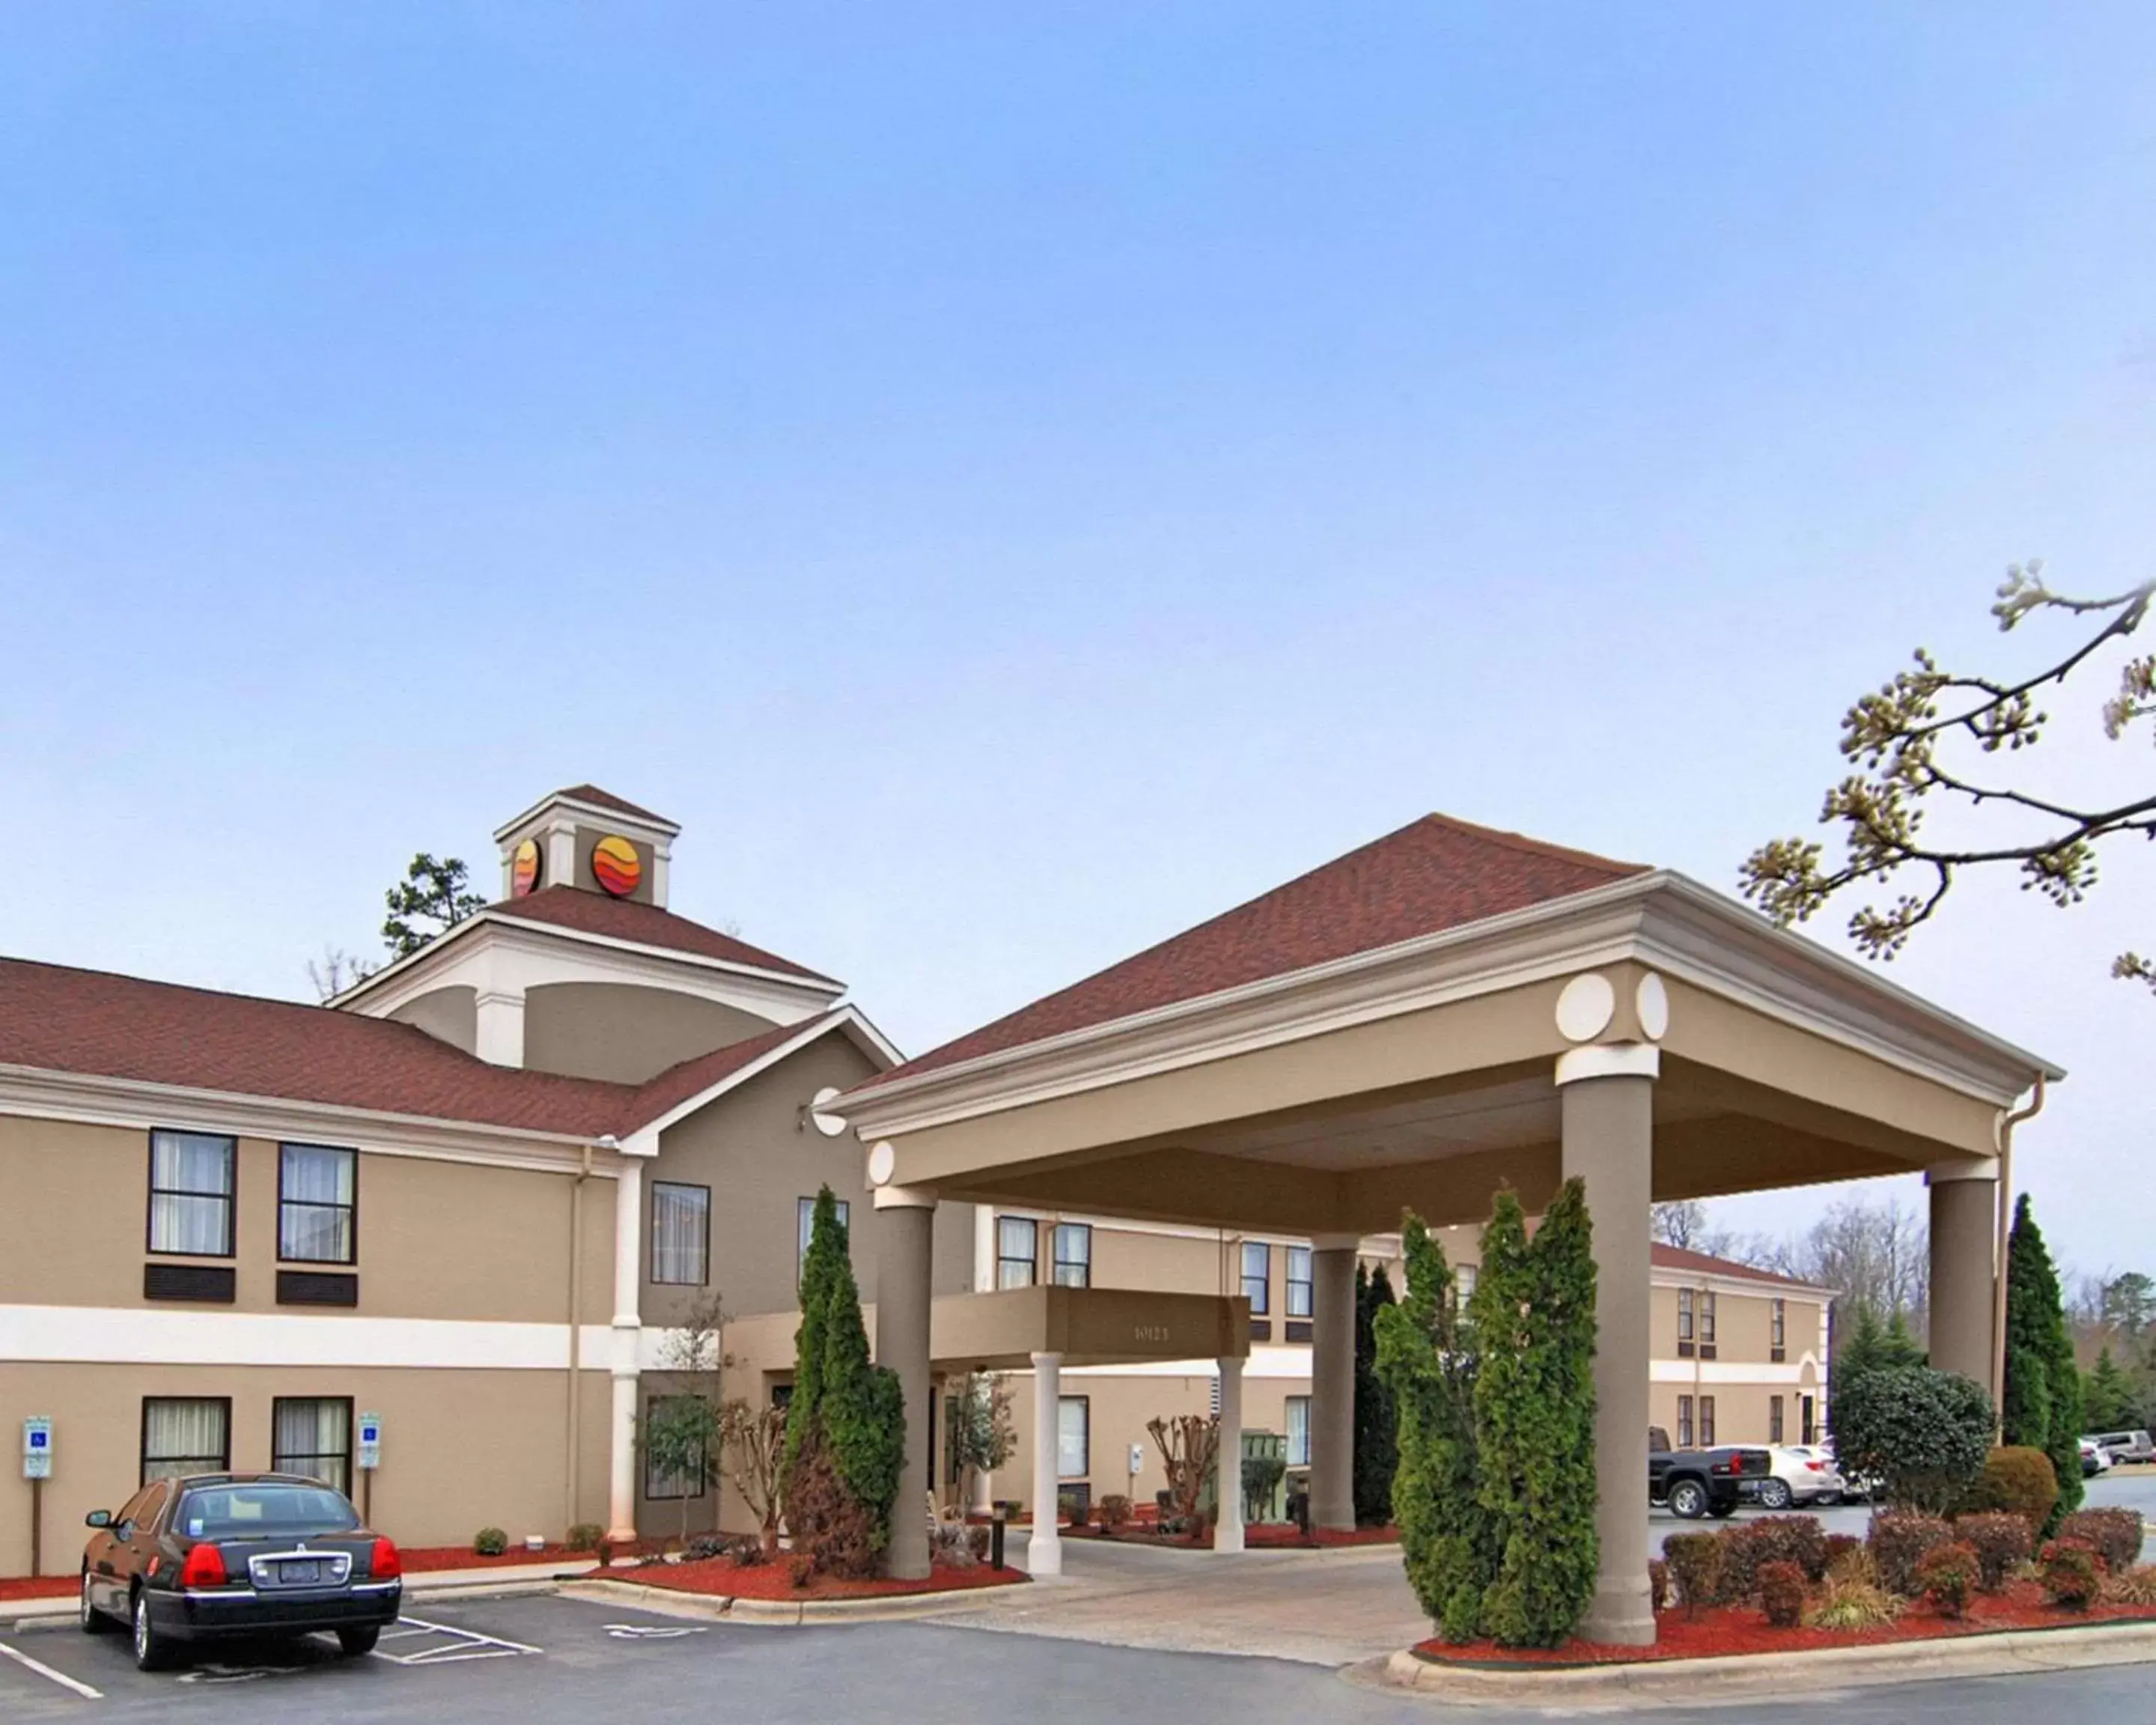 Property building in Quality Inn High Point - Archdale